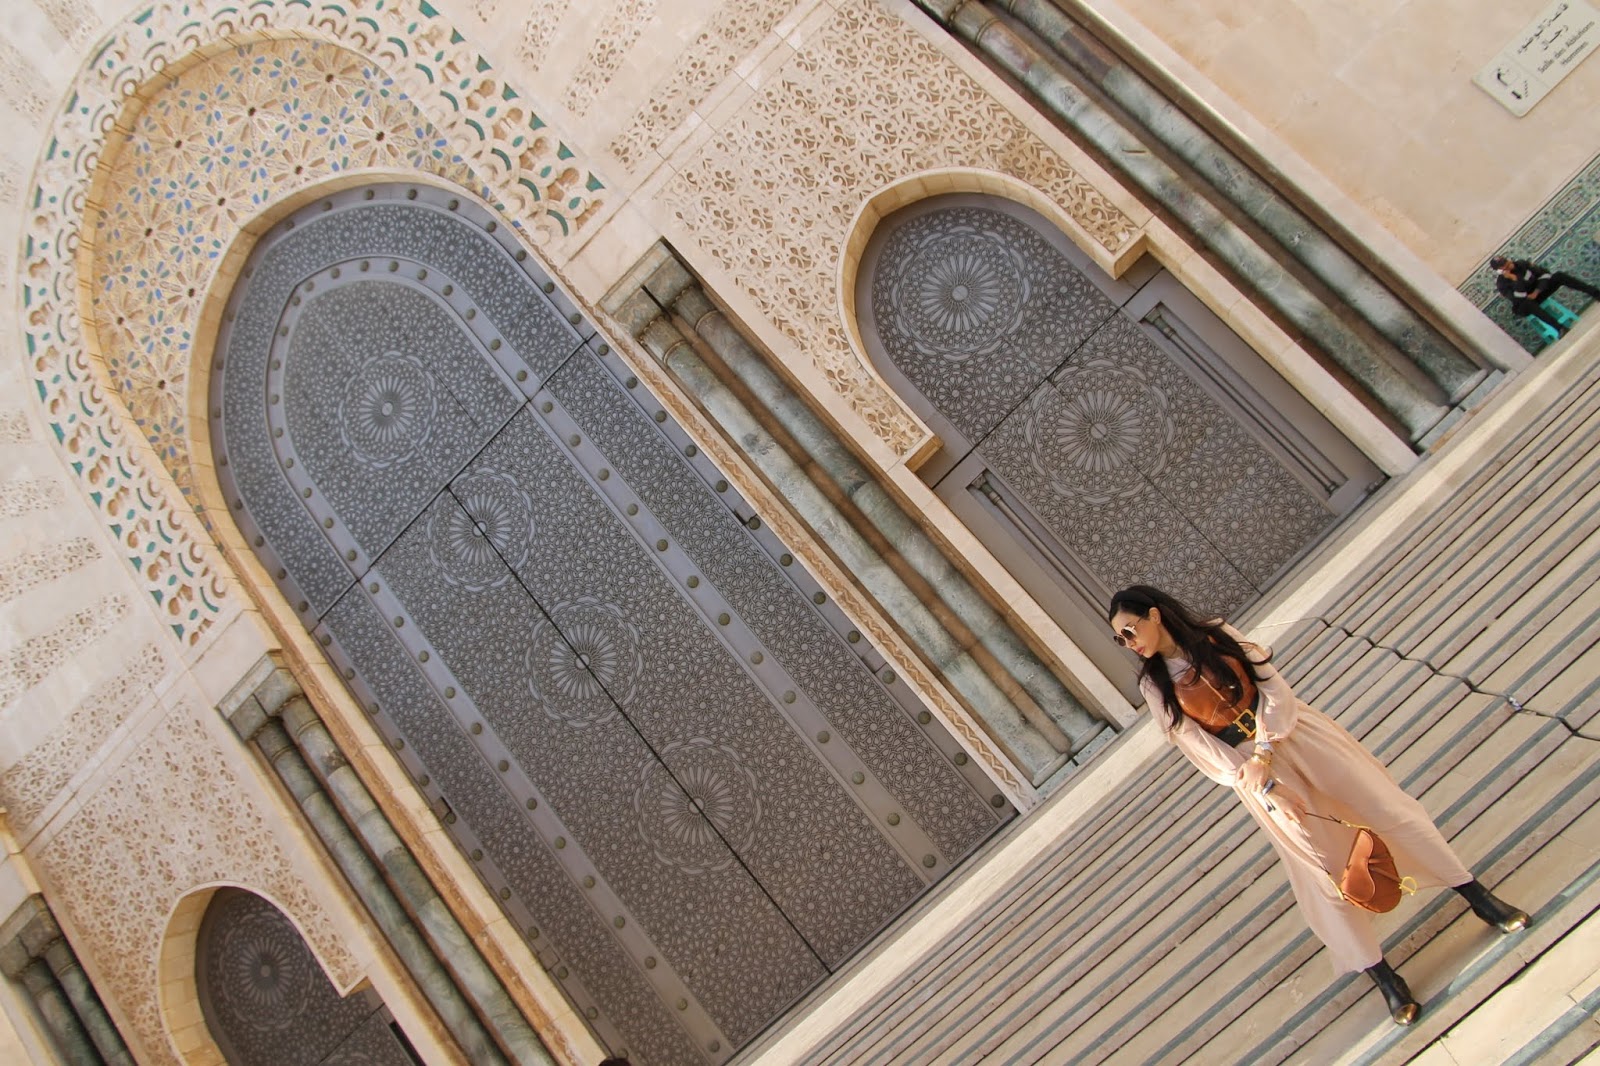 At The Impressive Hassan II Mosque